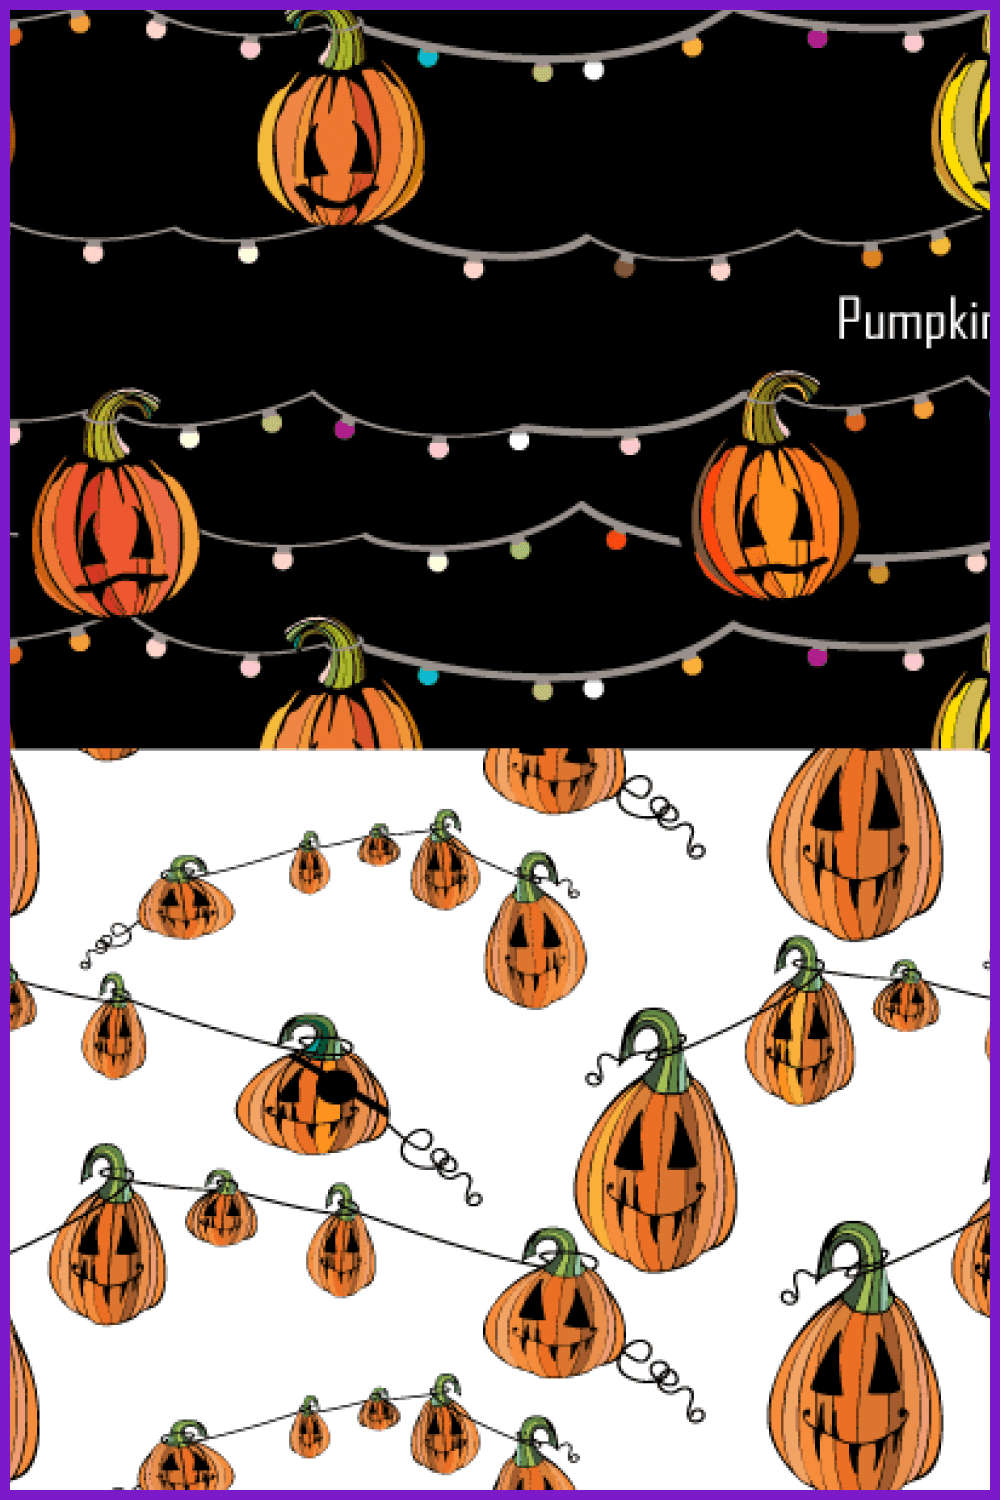 Garland pumpkins - This creative solution will set you apart from the crowd.